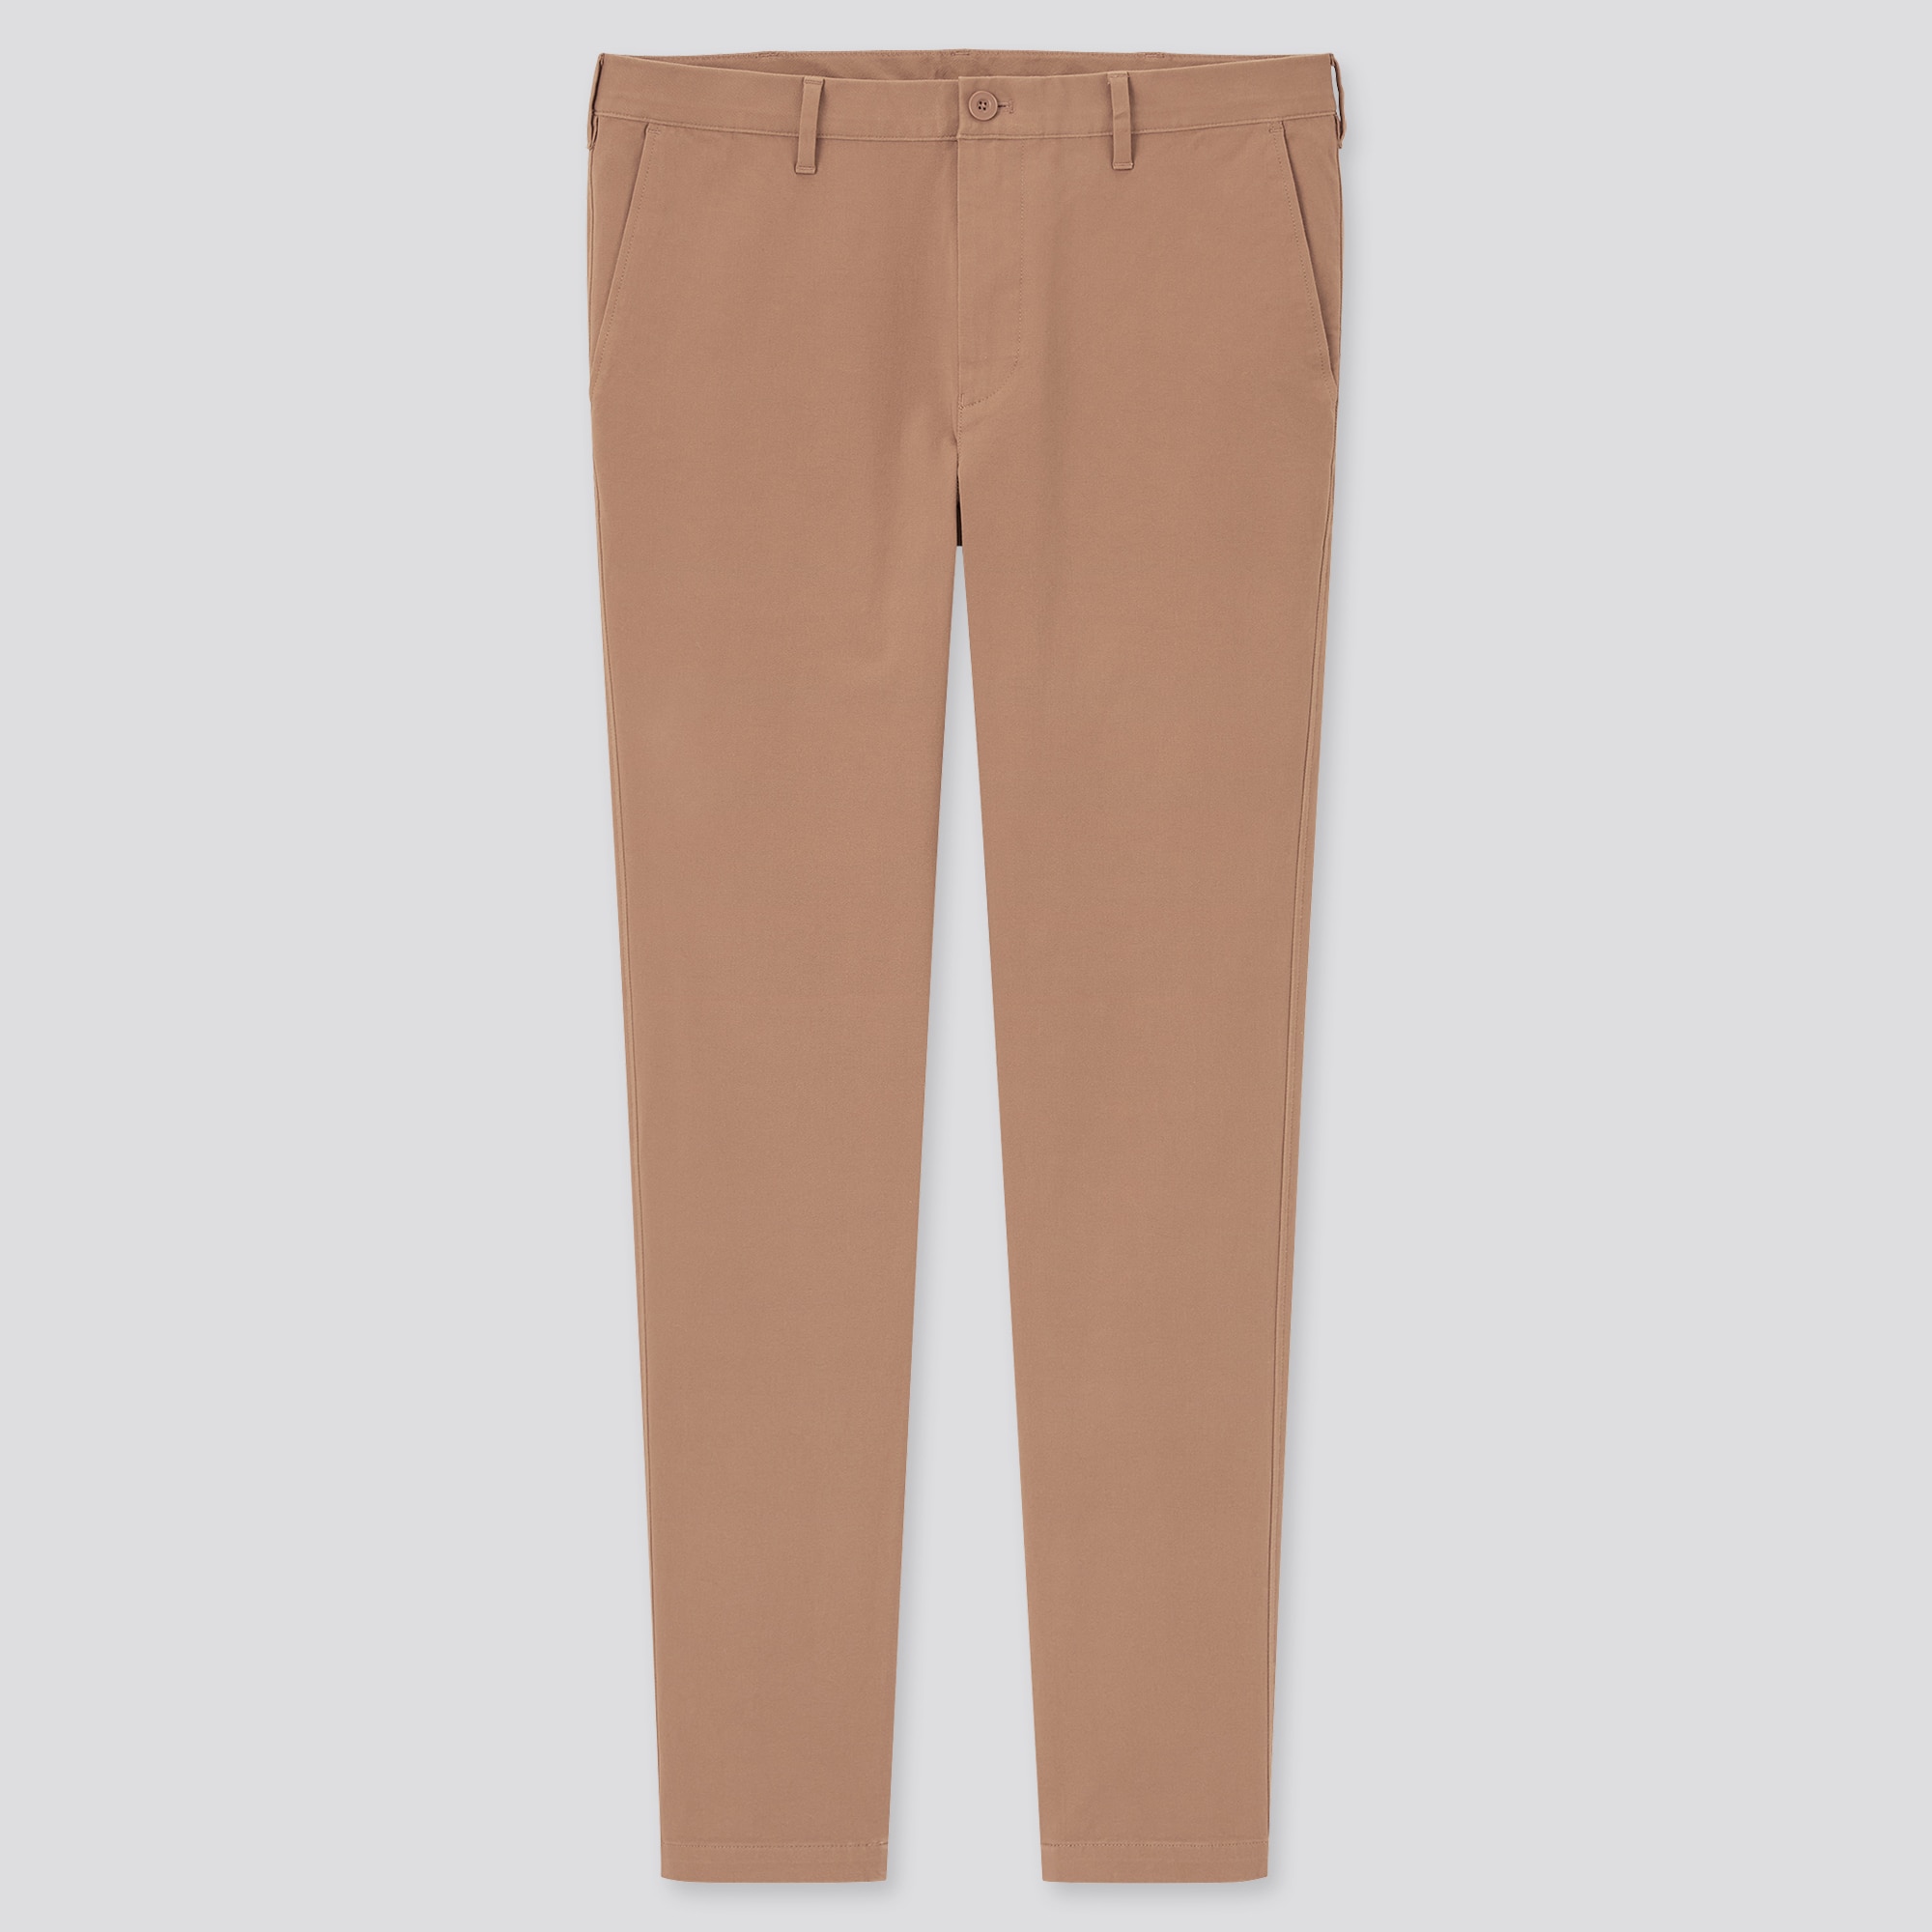 Meet the 35 wideleg Uniqlo trousers TikTok users love I own these in 3  colours